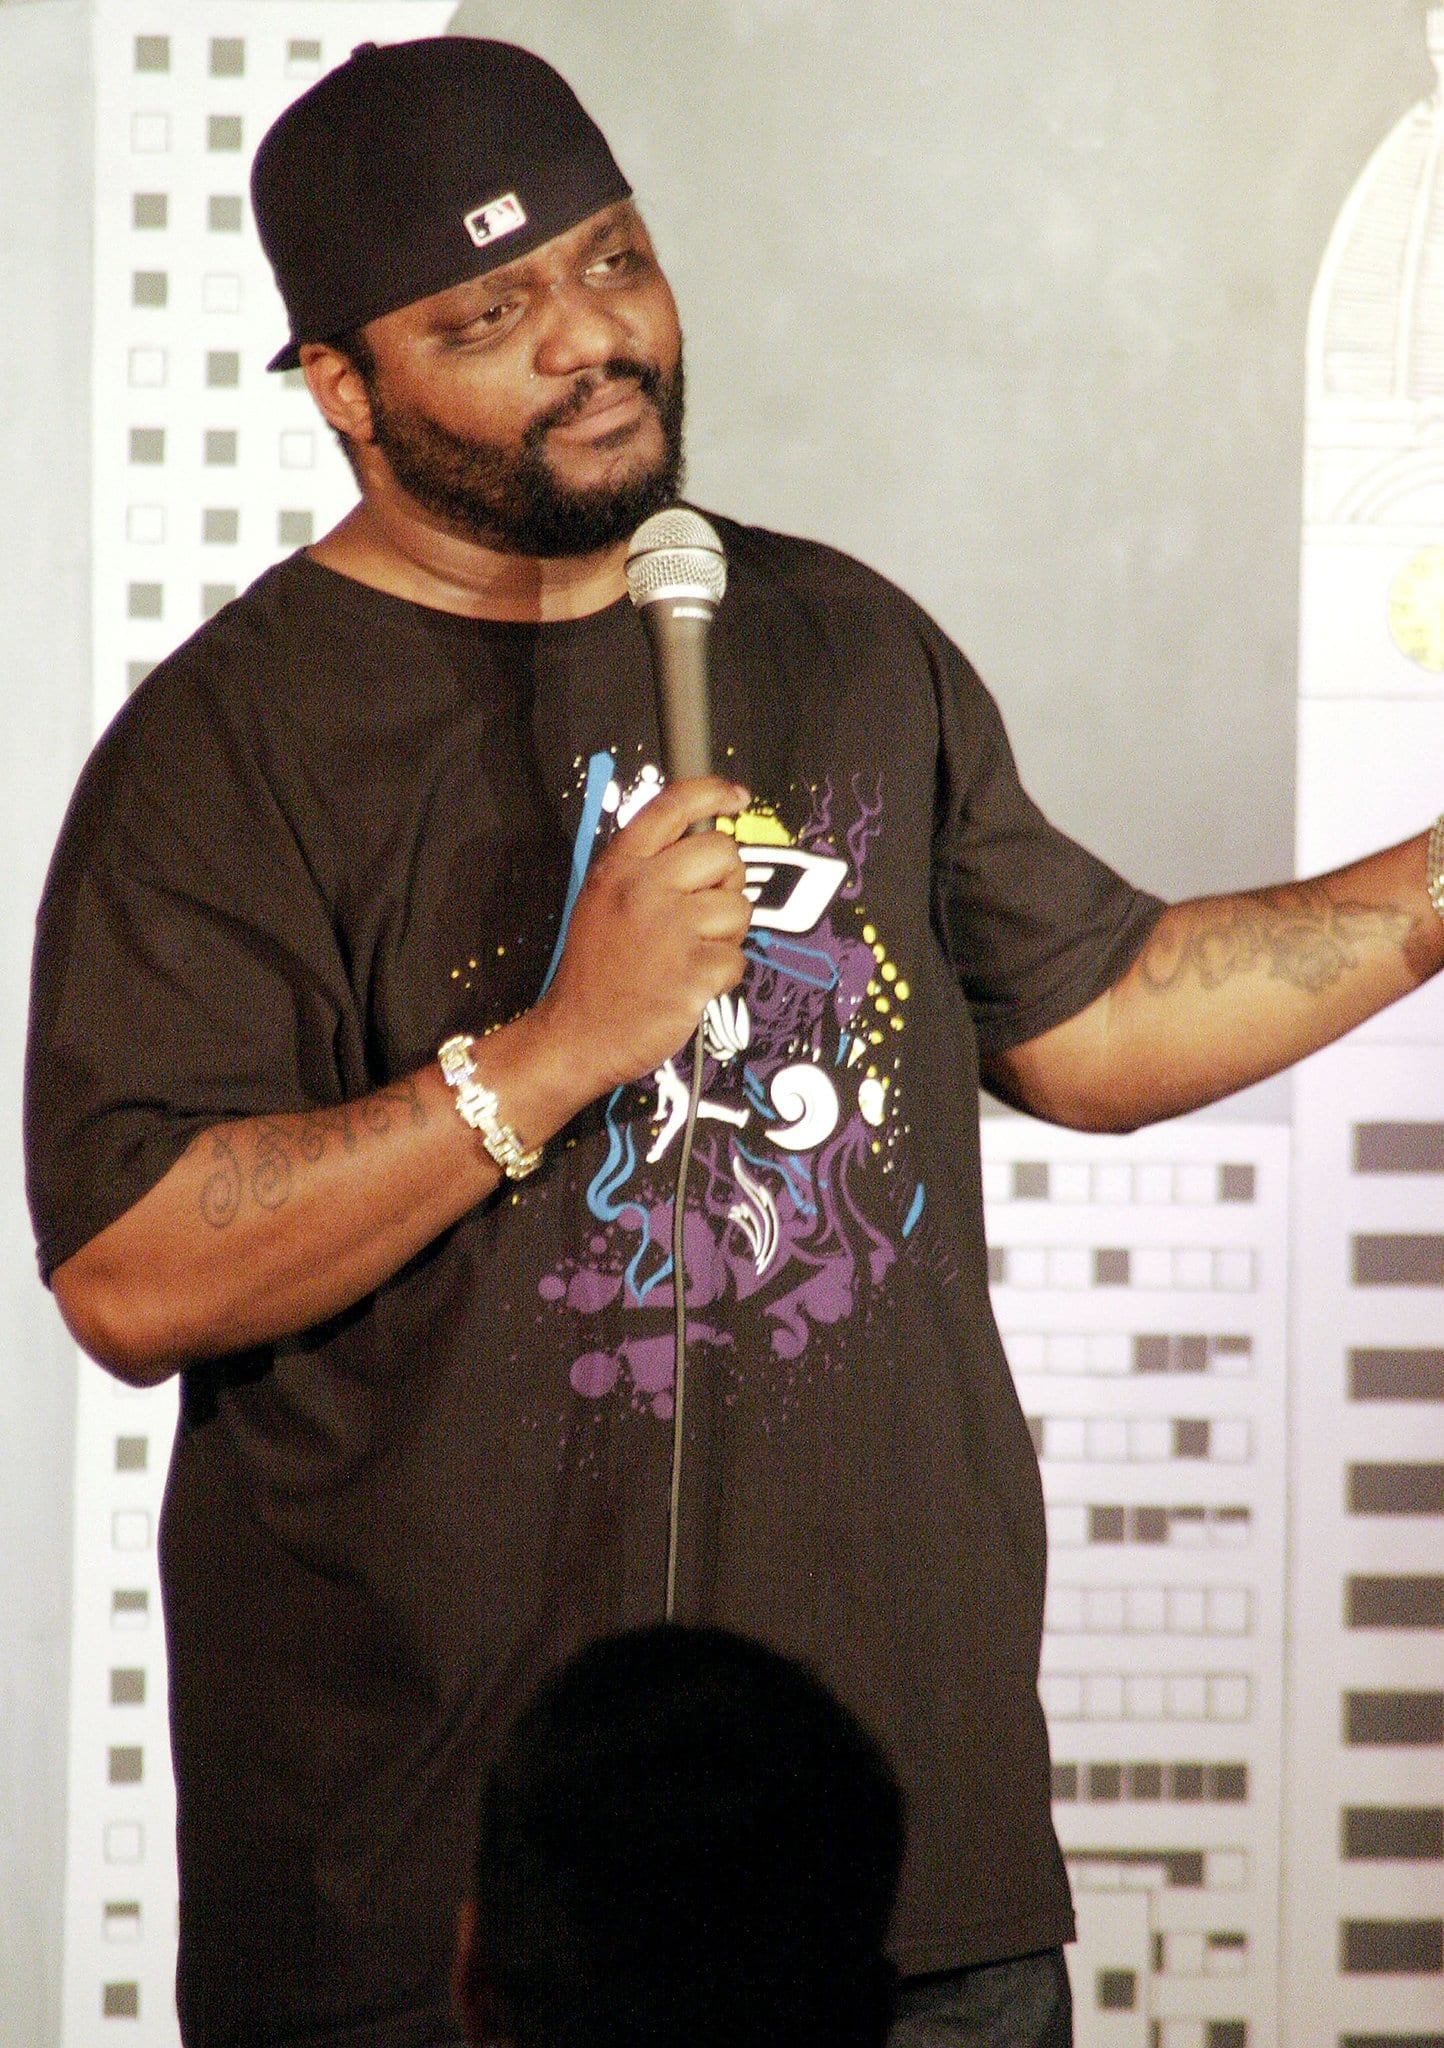 Comedian Aries Spears ruthlessly makes fat-shaming remarks on Lizzo